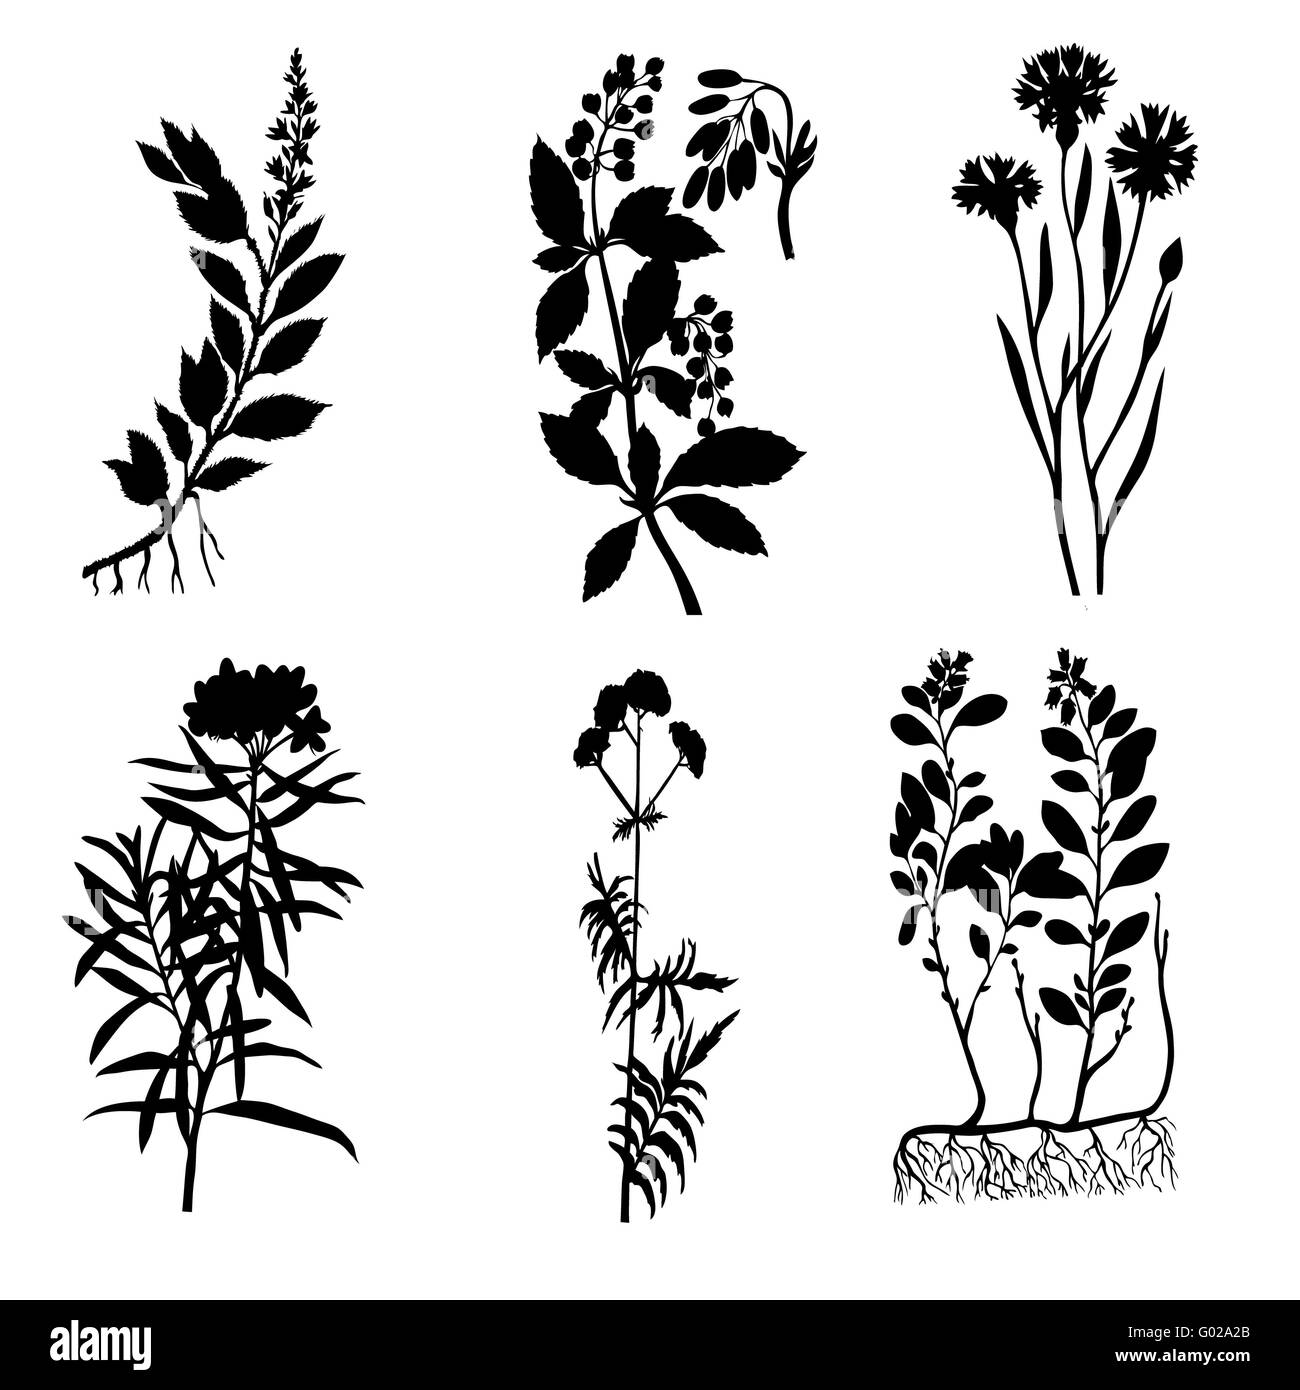 vector silhouettes of the medicinal plants on white background Stock Photo